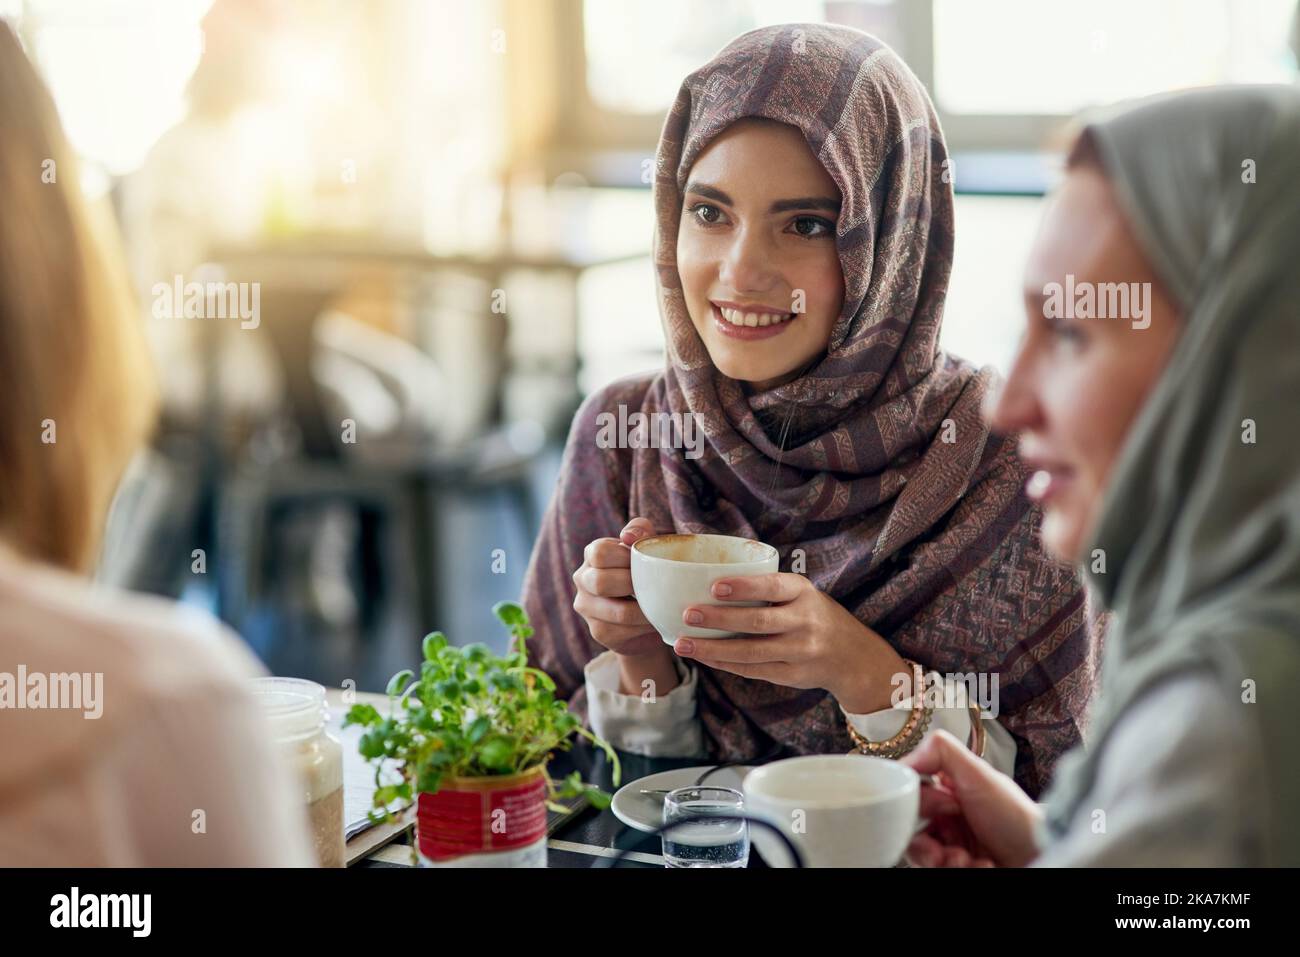 Nothing brings people together like coffee. a group of women chatting over coffee in a cafe. Stock Photo